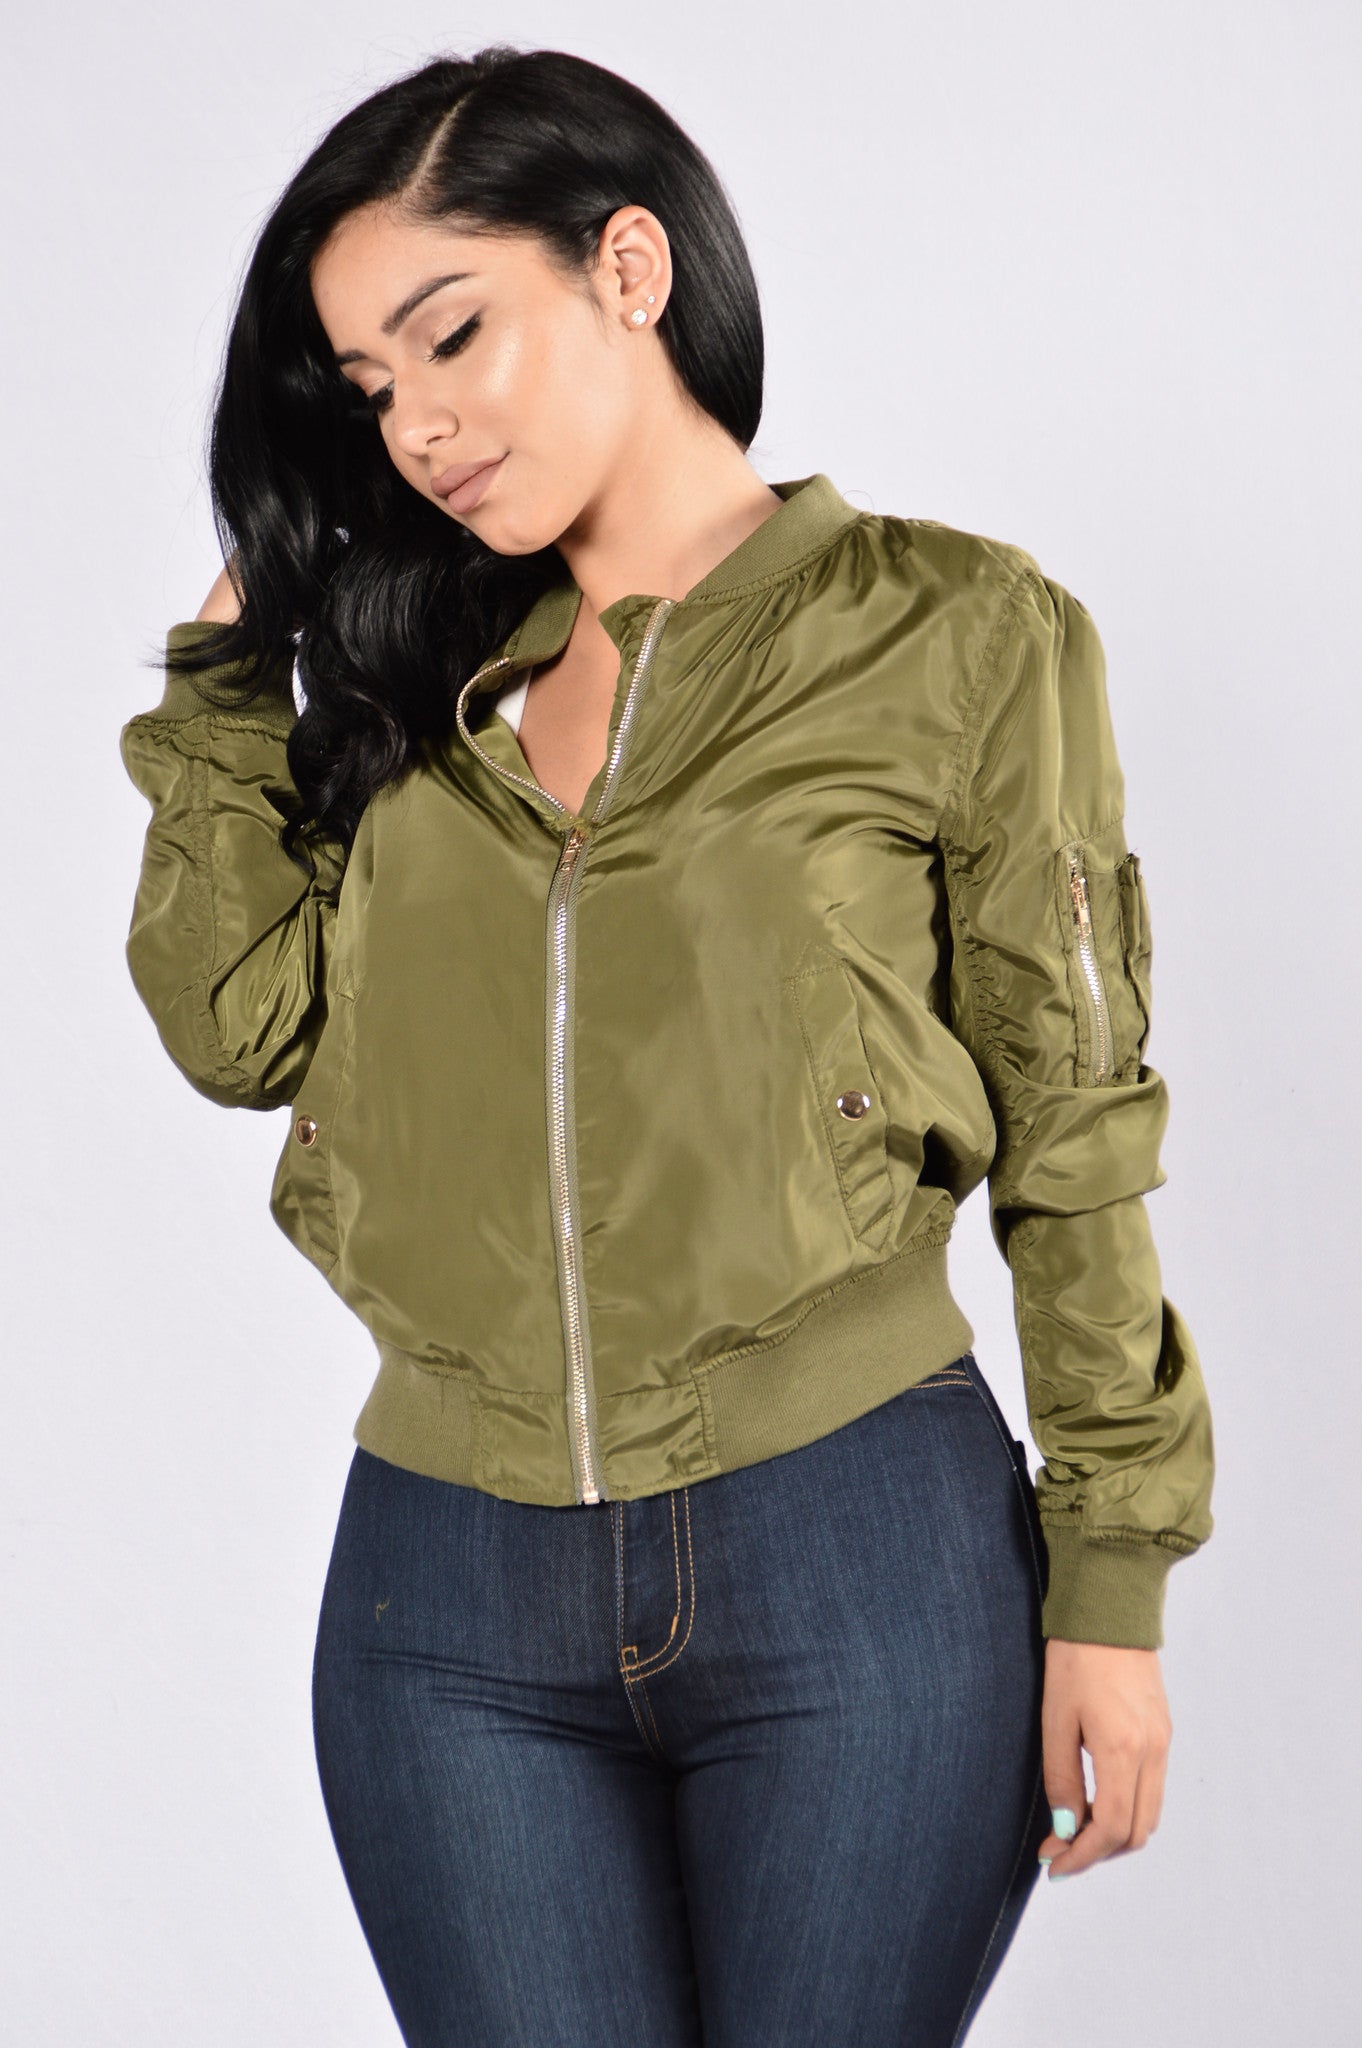 Picture Me Rollin' Jacket - Olive